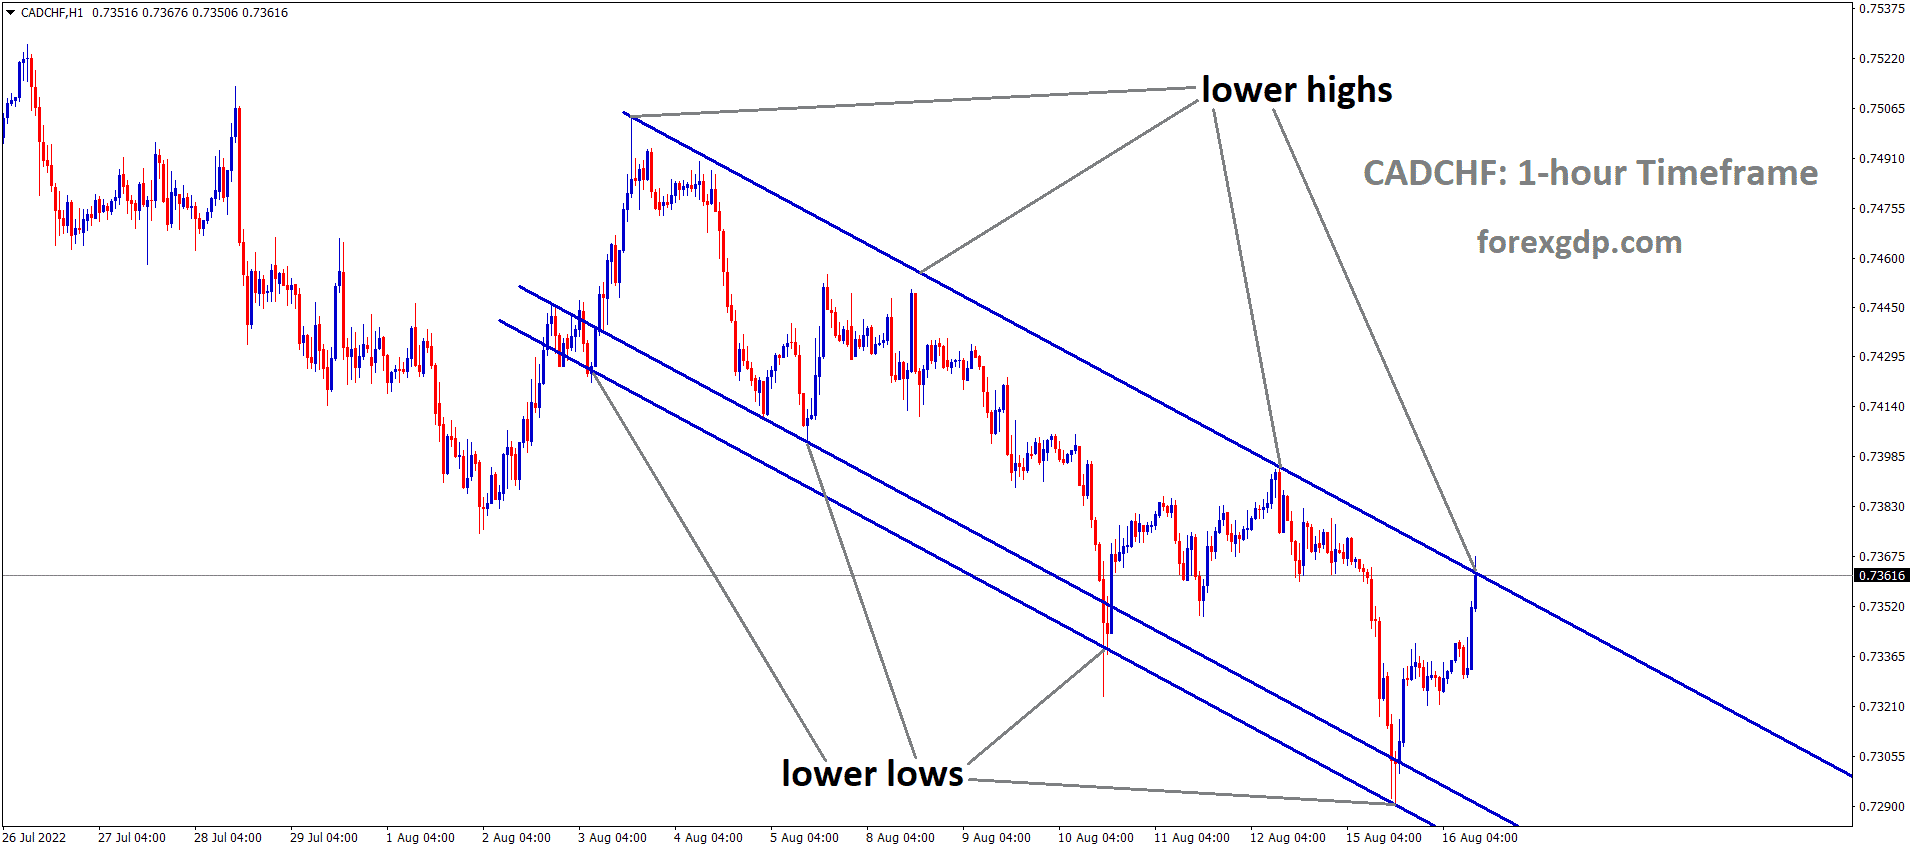 CADCHF is moving in the Descending channel and the Market has reached the Lower high area of the channel